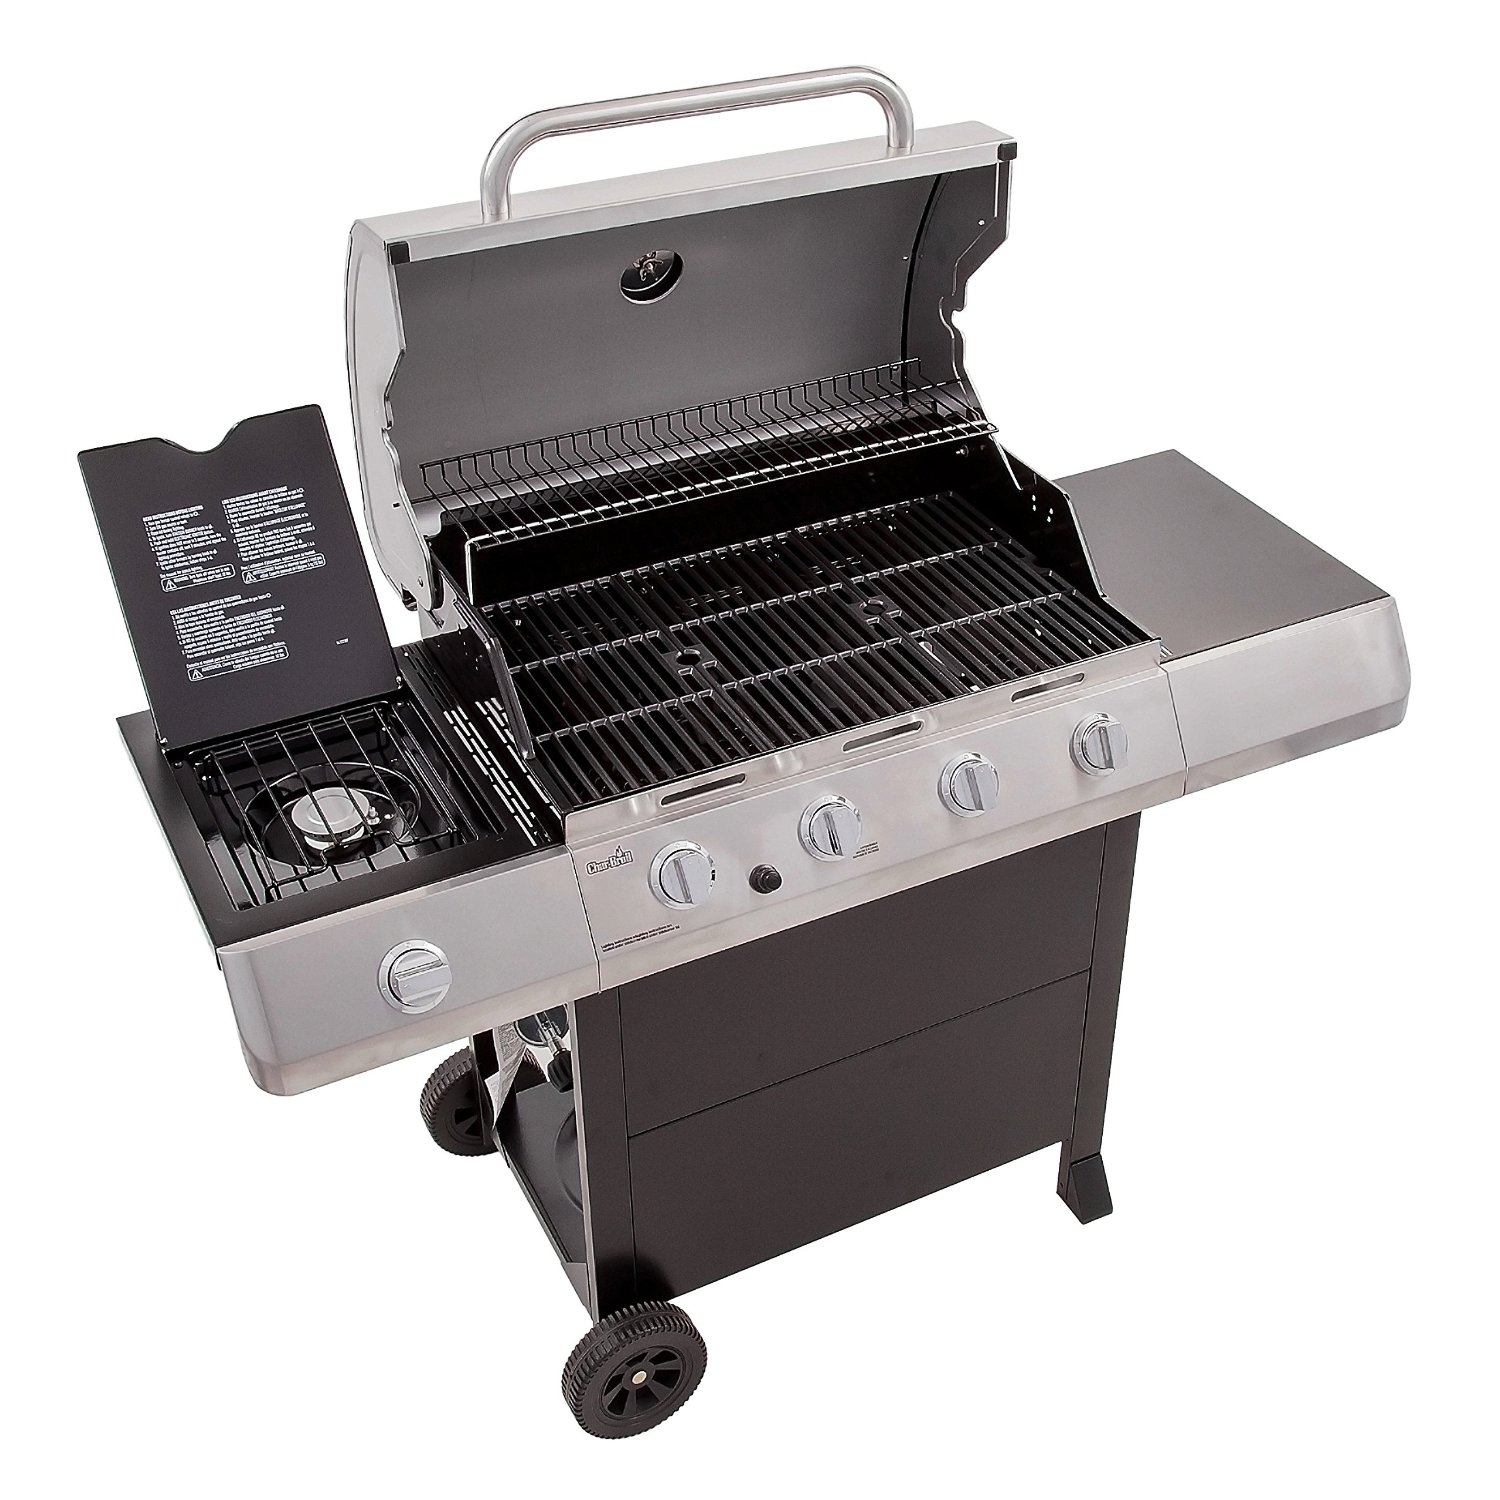 Char-Broil Classic 4-Burner Gas Grill Review